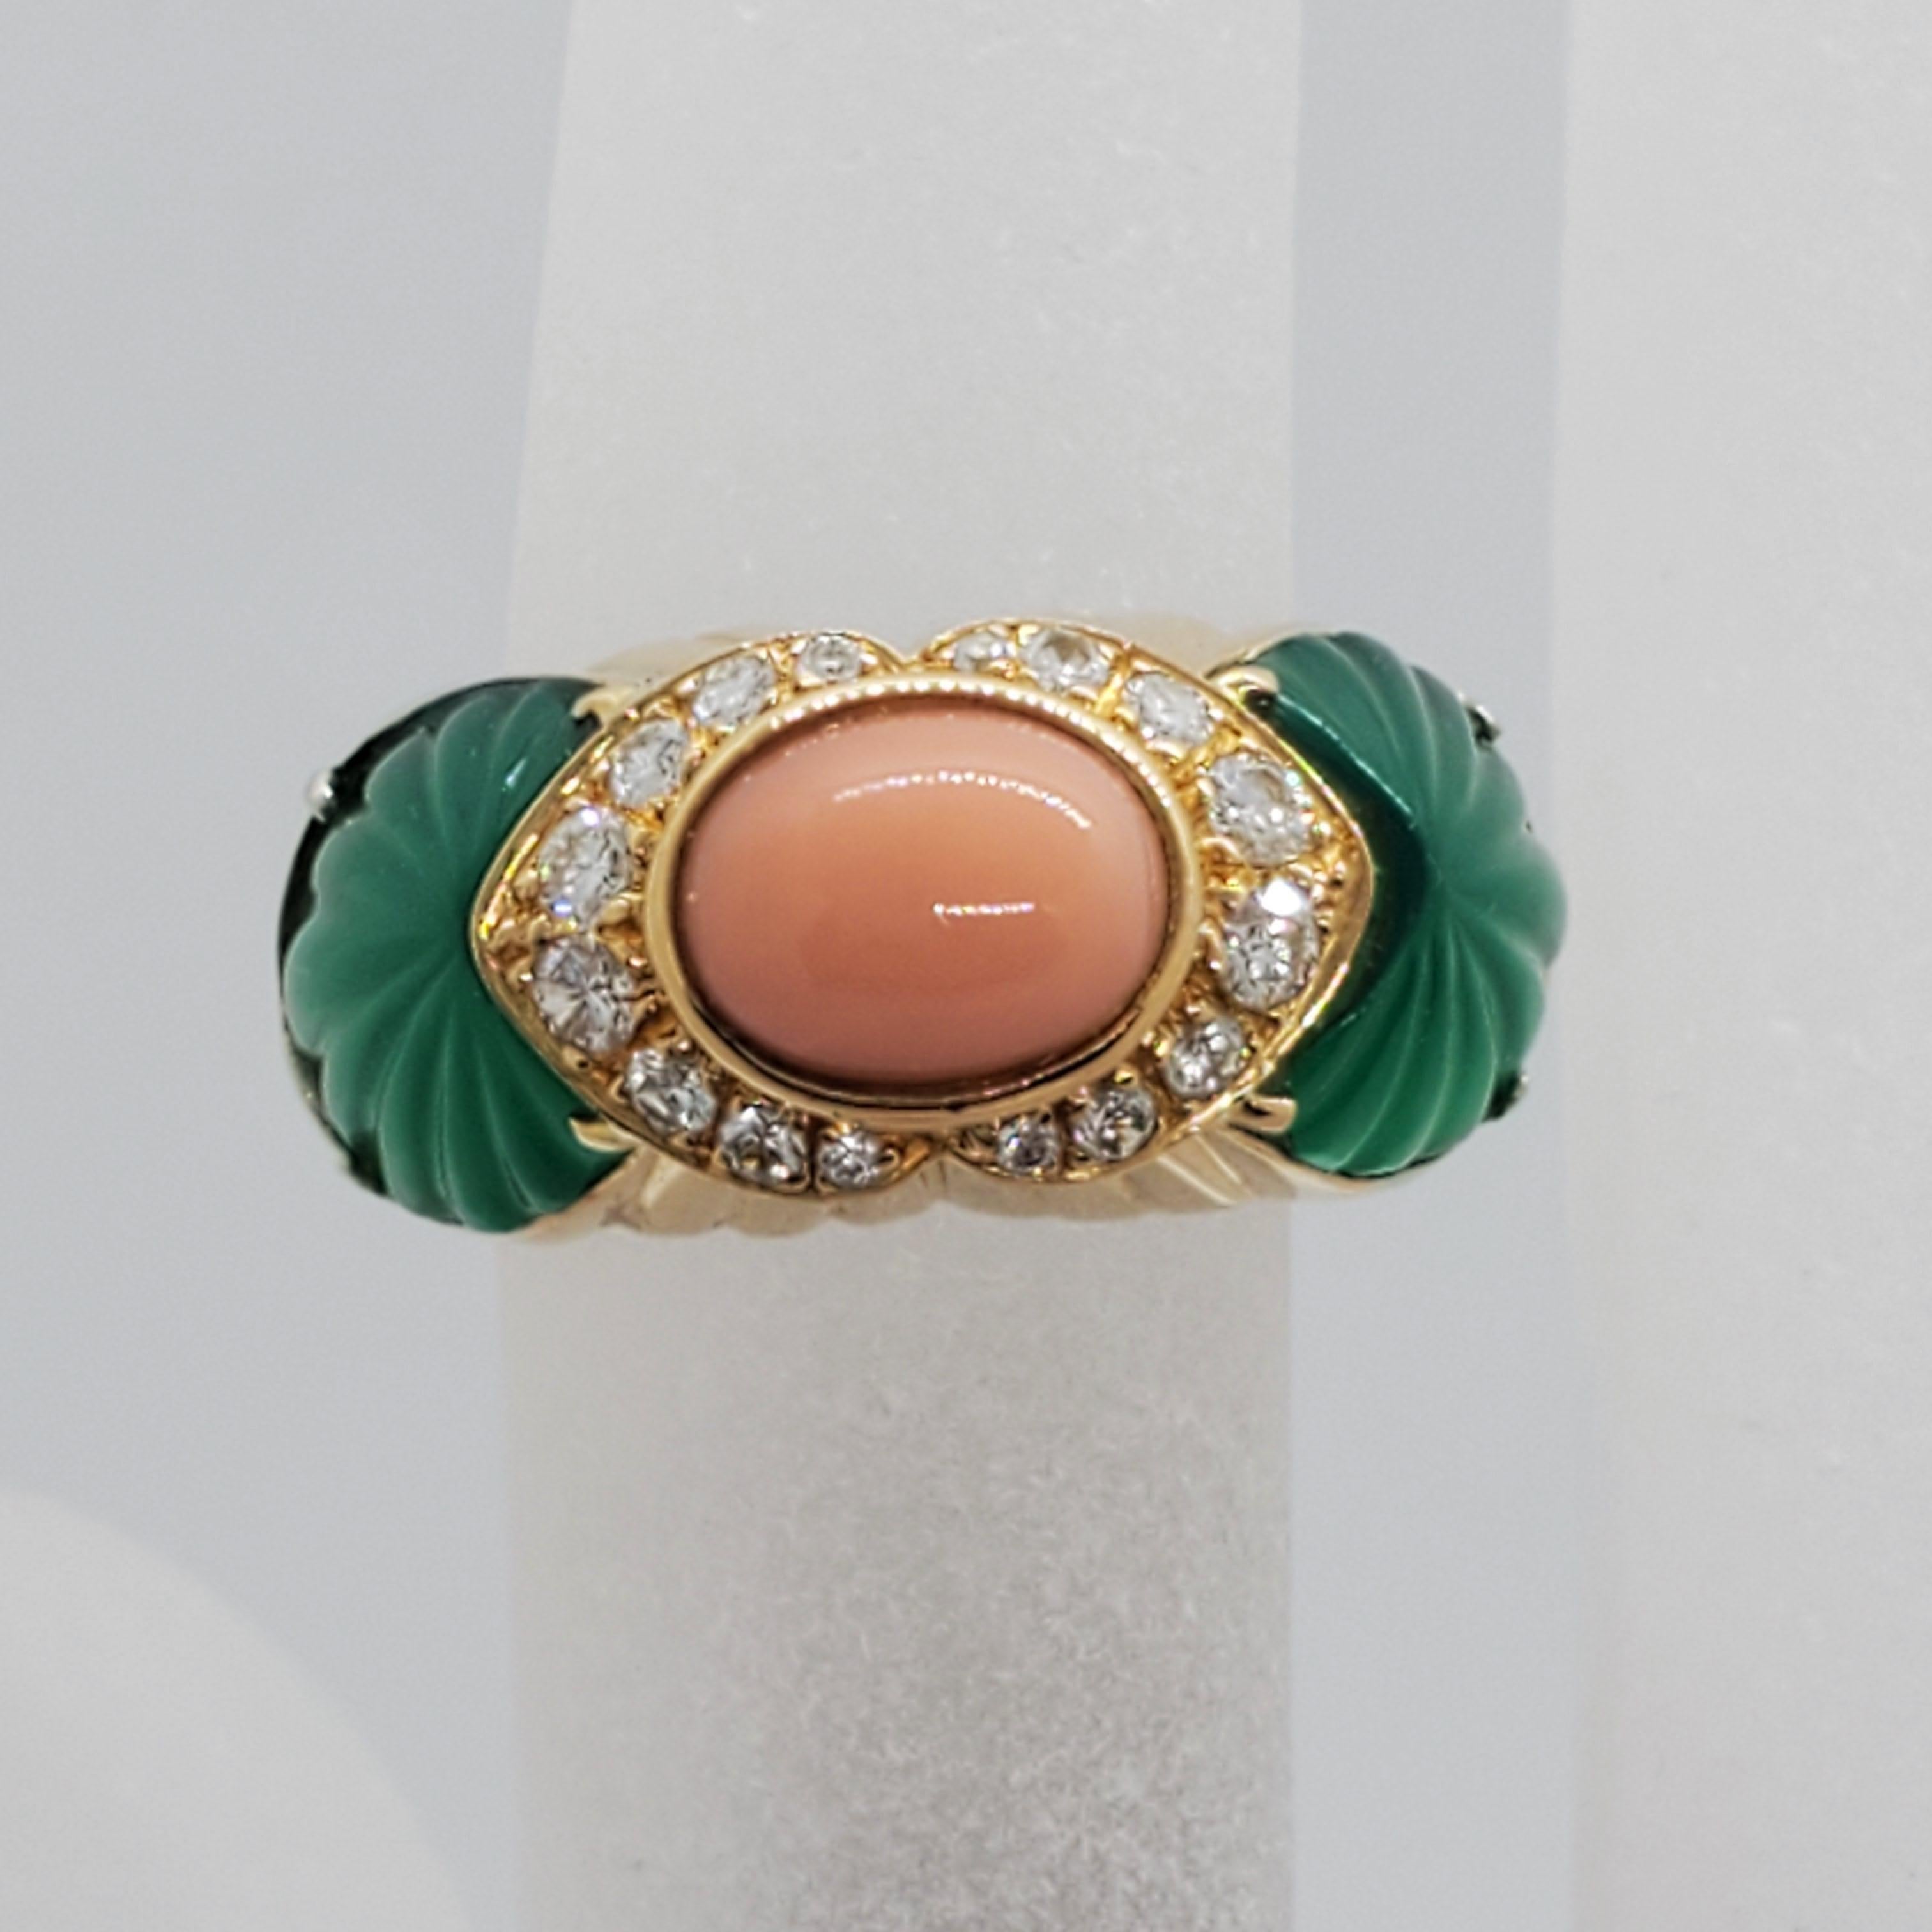 Gorgeous Cartier estate pink coral oval cabochon and carved chalcedony ring in 18k yellow gold. Diamond weight is 0.20 cts. Very unique design and easy to wear day or evening. Size 3.75.